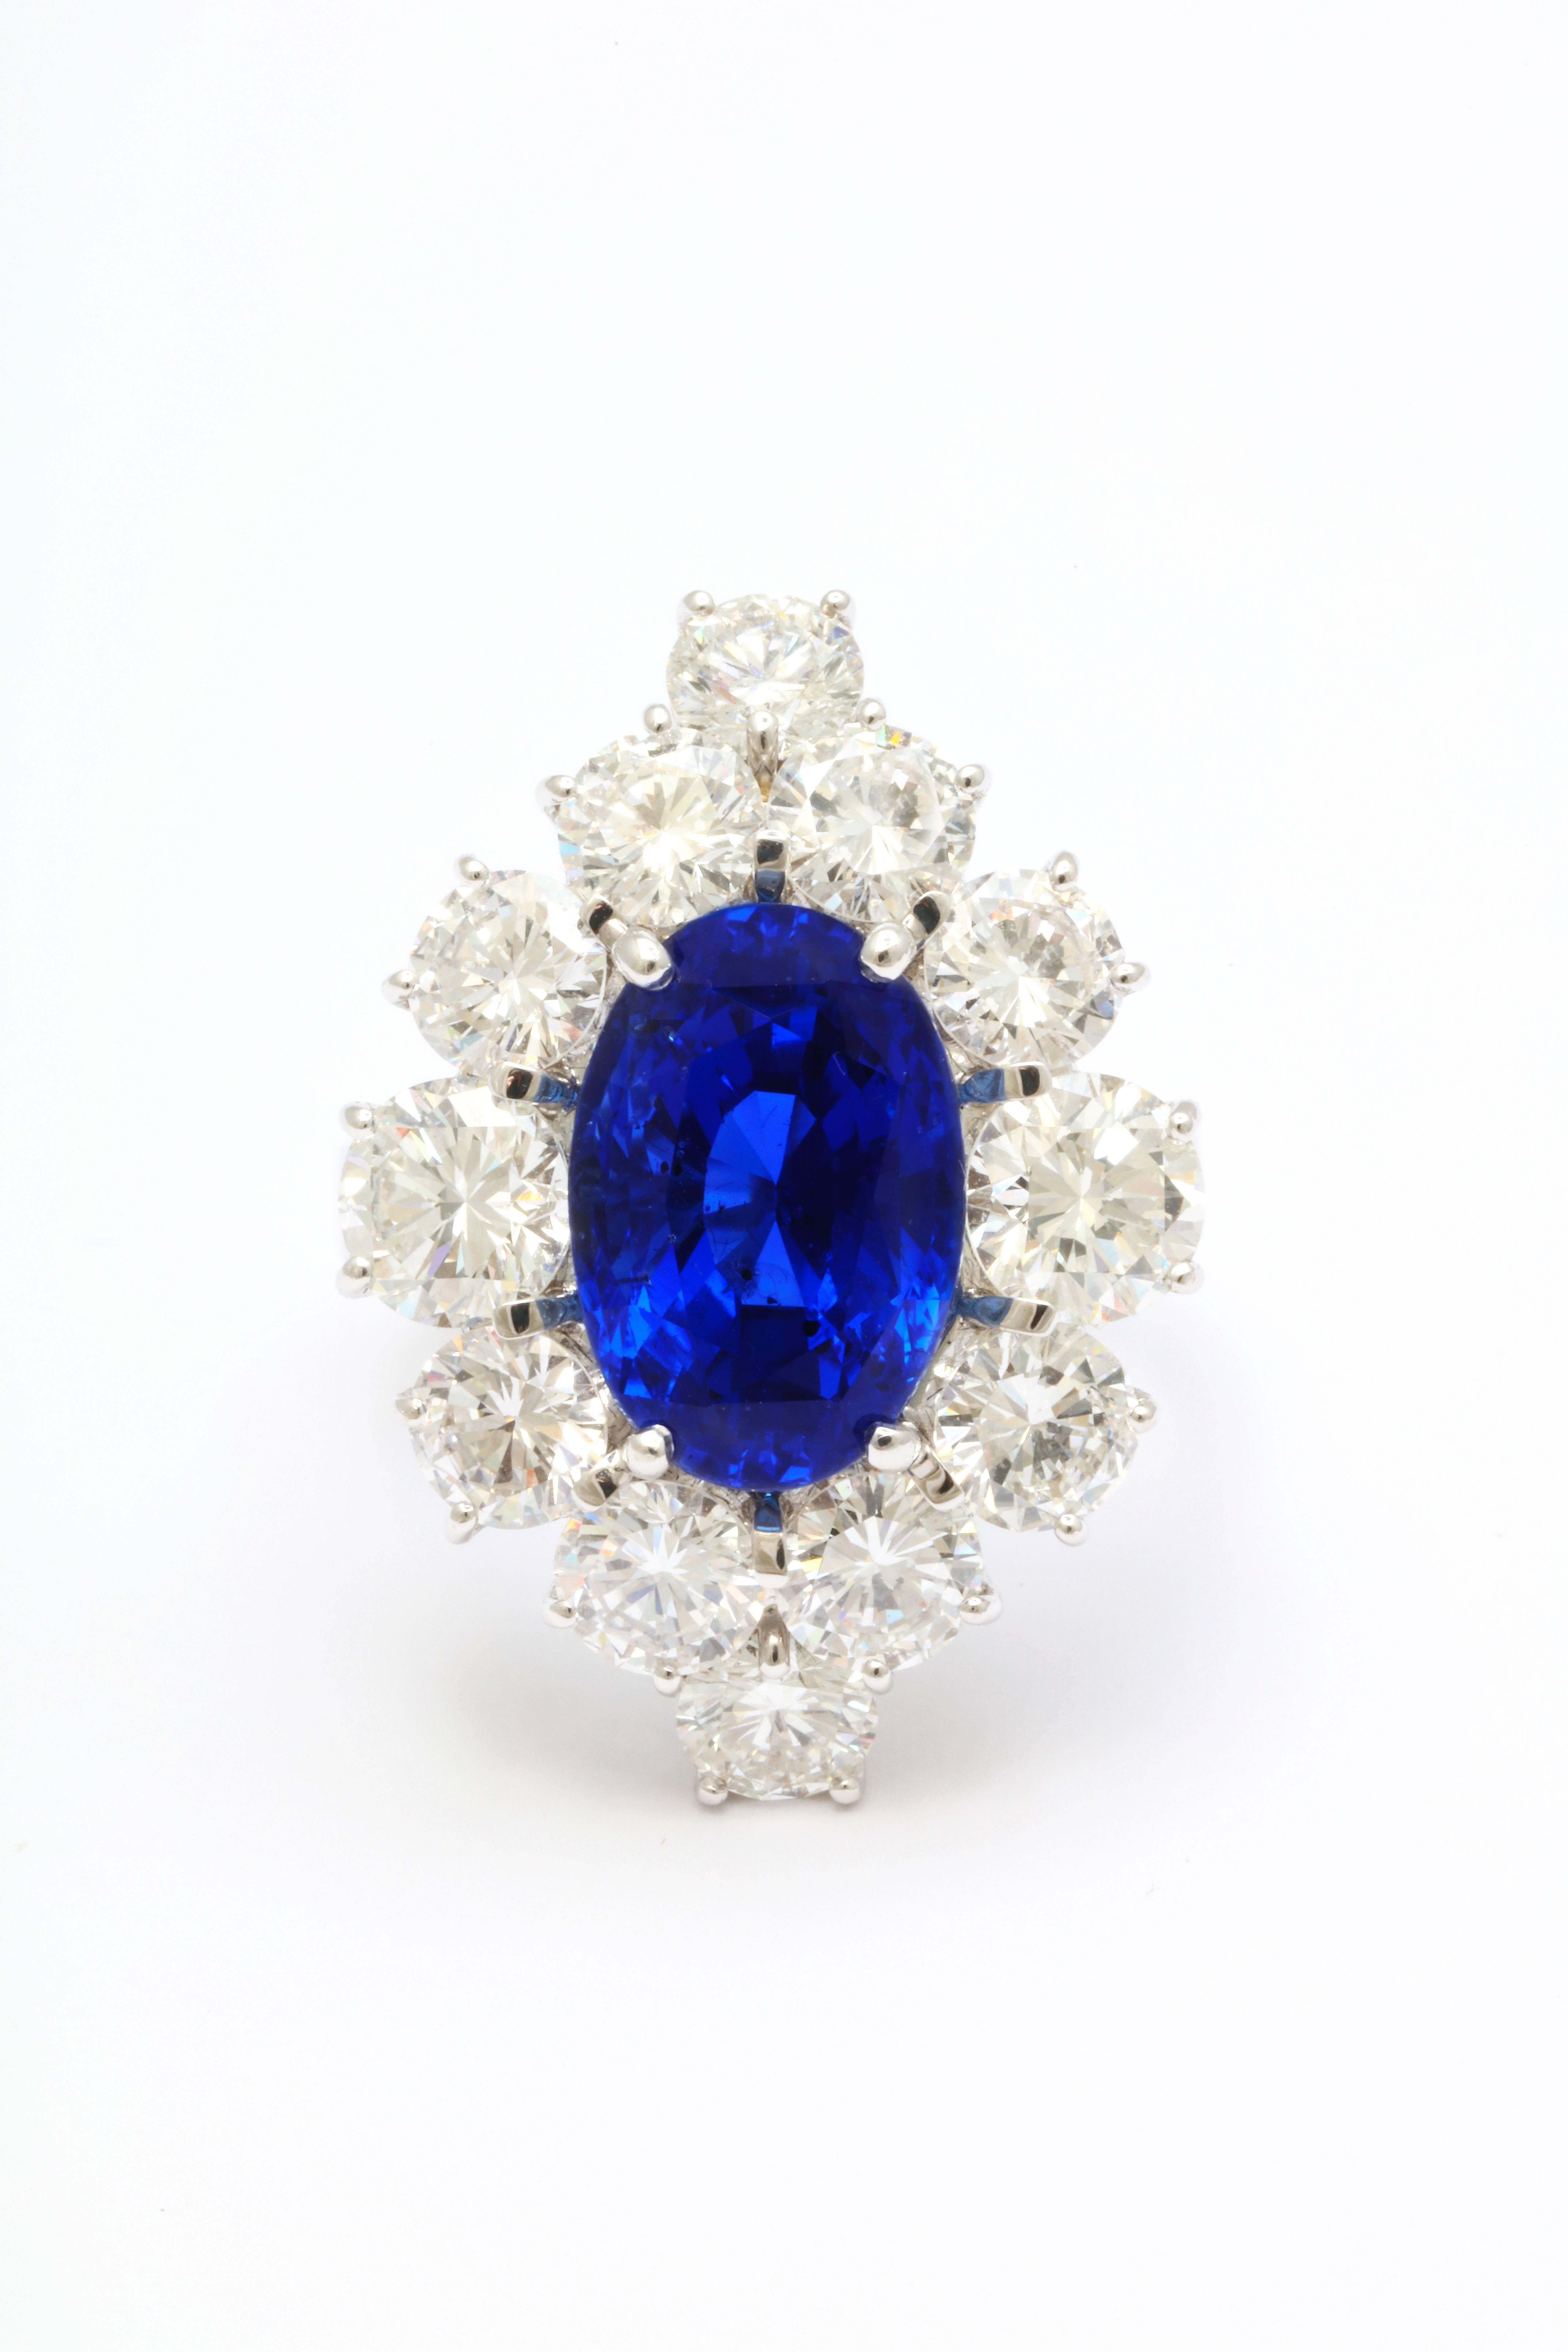 The bright blue app. 8.57 carat oval sapphire is surrounded by 12 round brilliant cut diamonds weighing 0.40 carats each.  The bright blue color of the sapphire, combined with the fantastic brilliance of the large, round diamonds results in a true